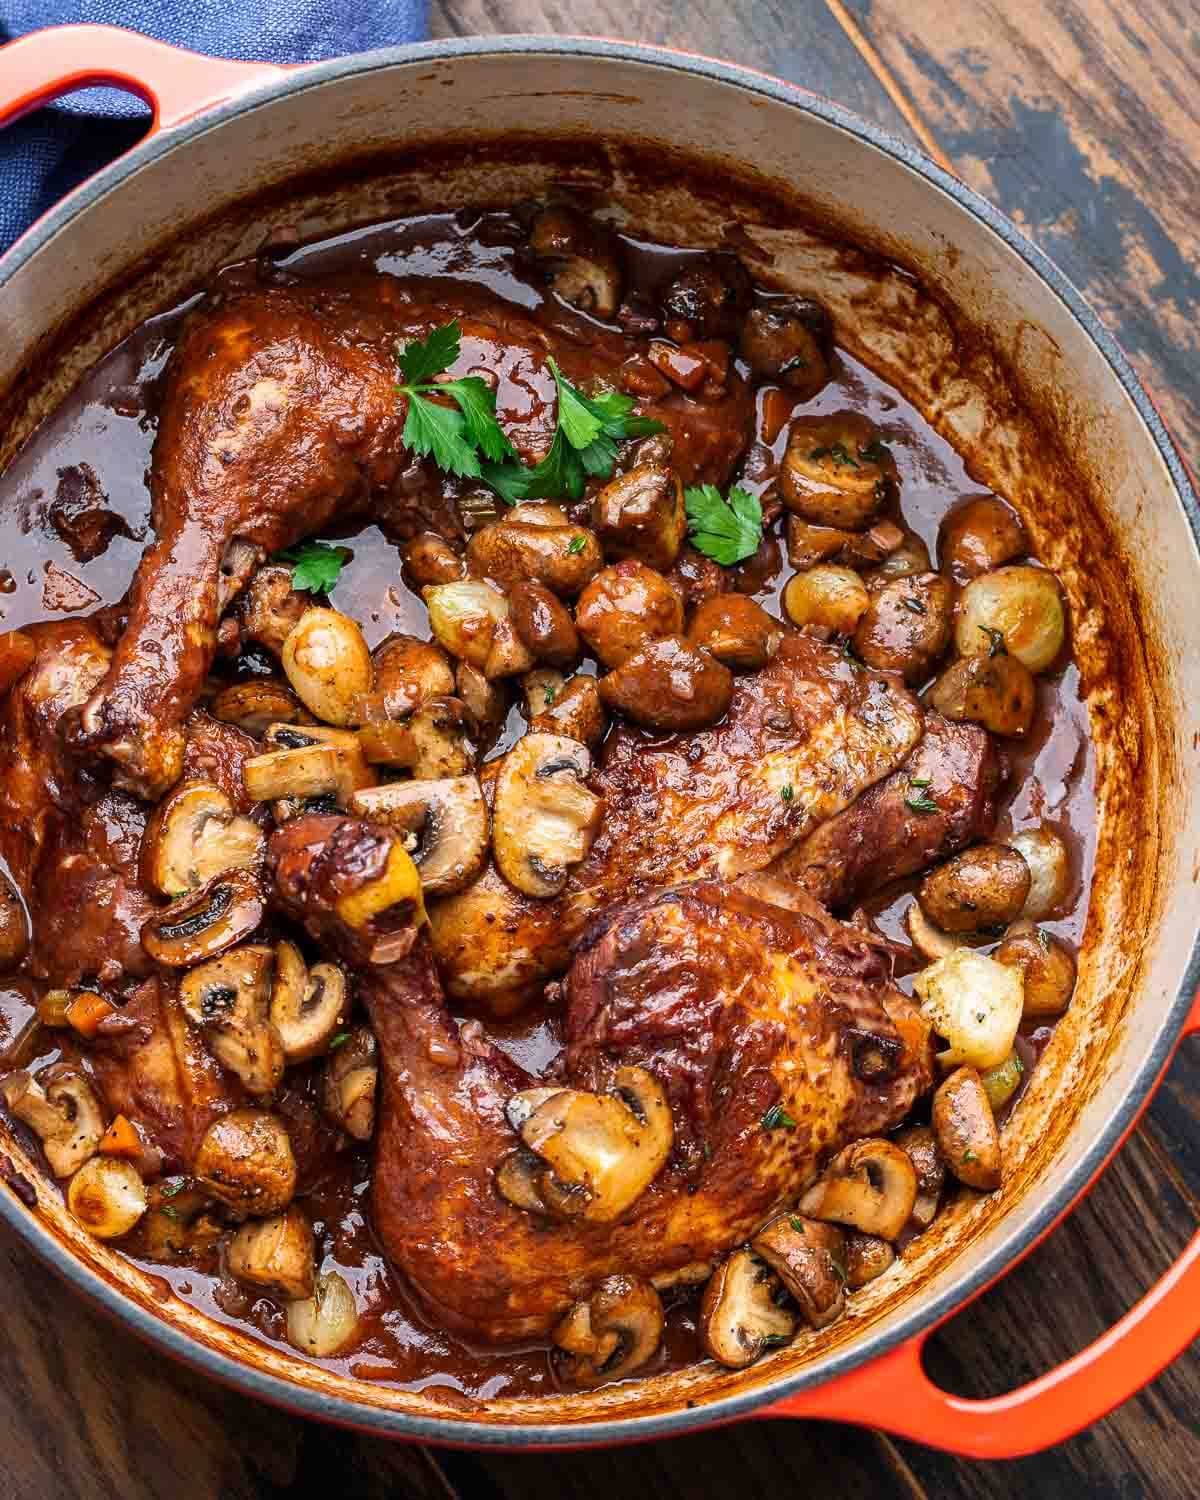 Overhead shot of coq au vin in Dutch oven on wood table.